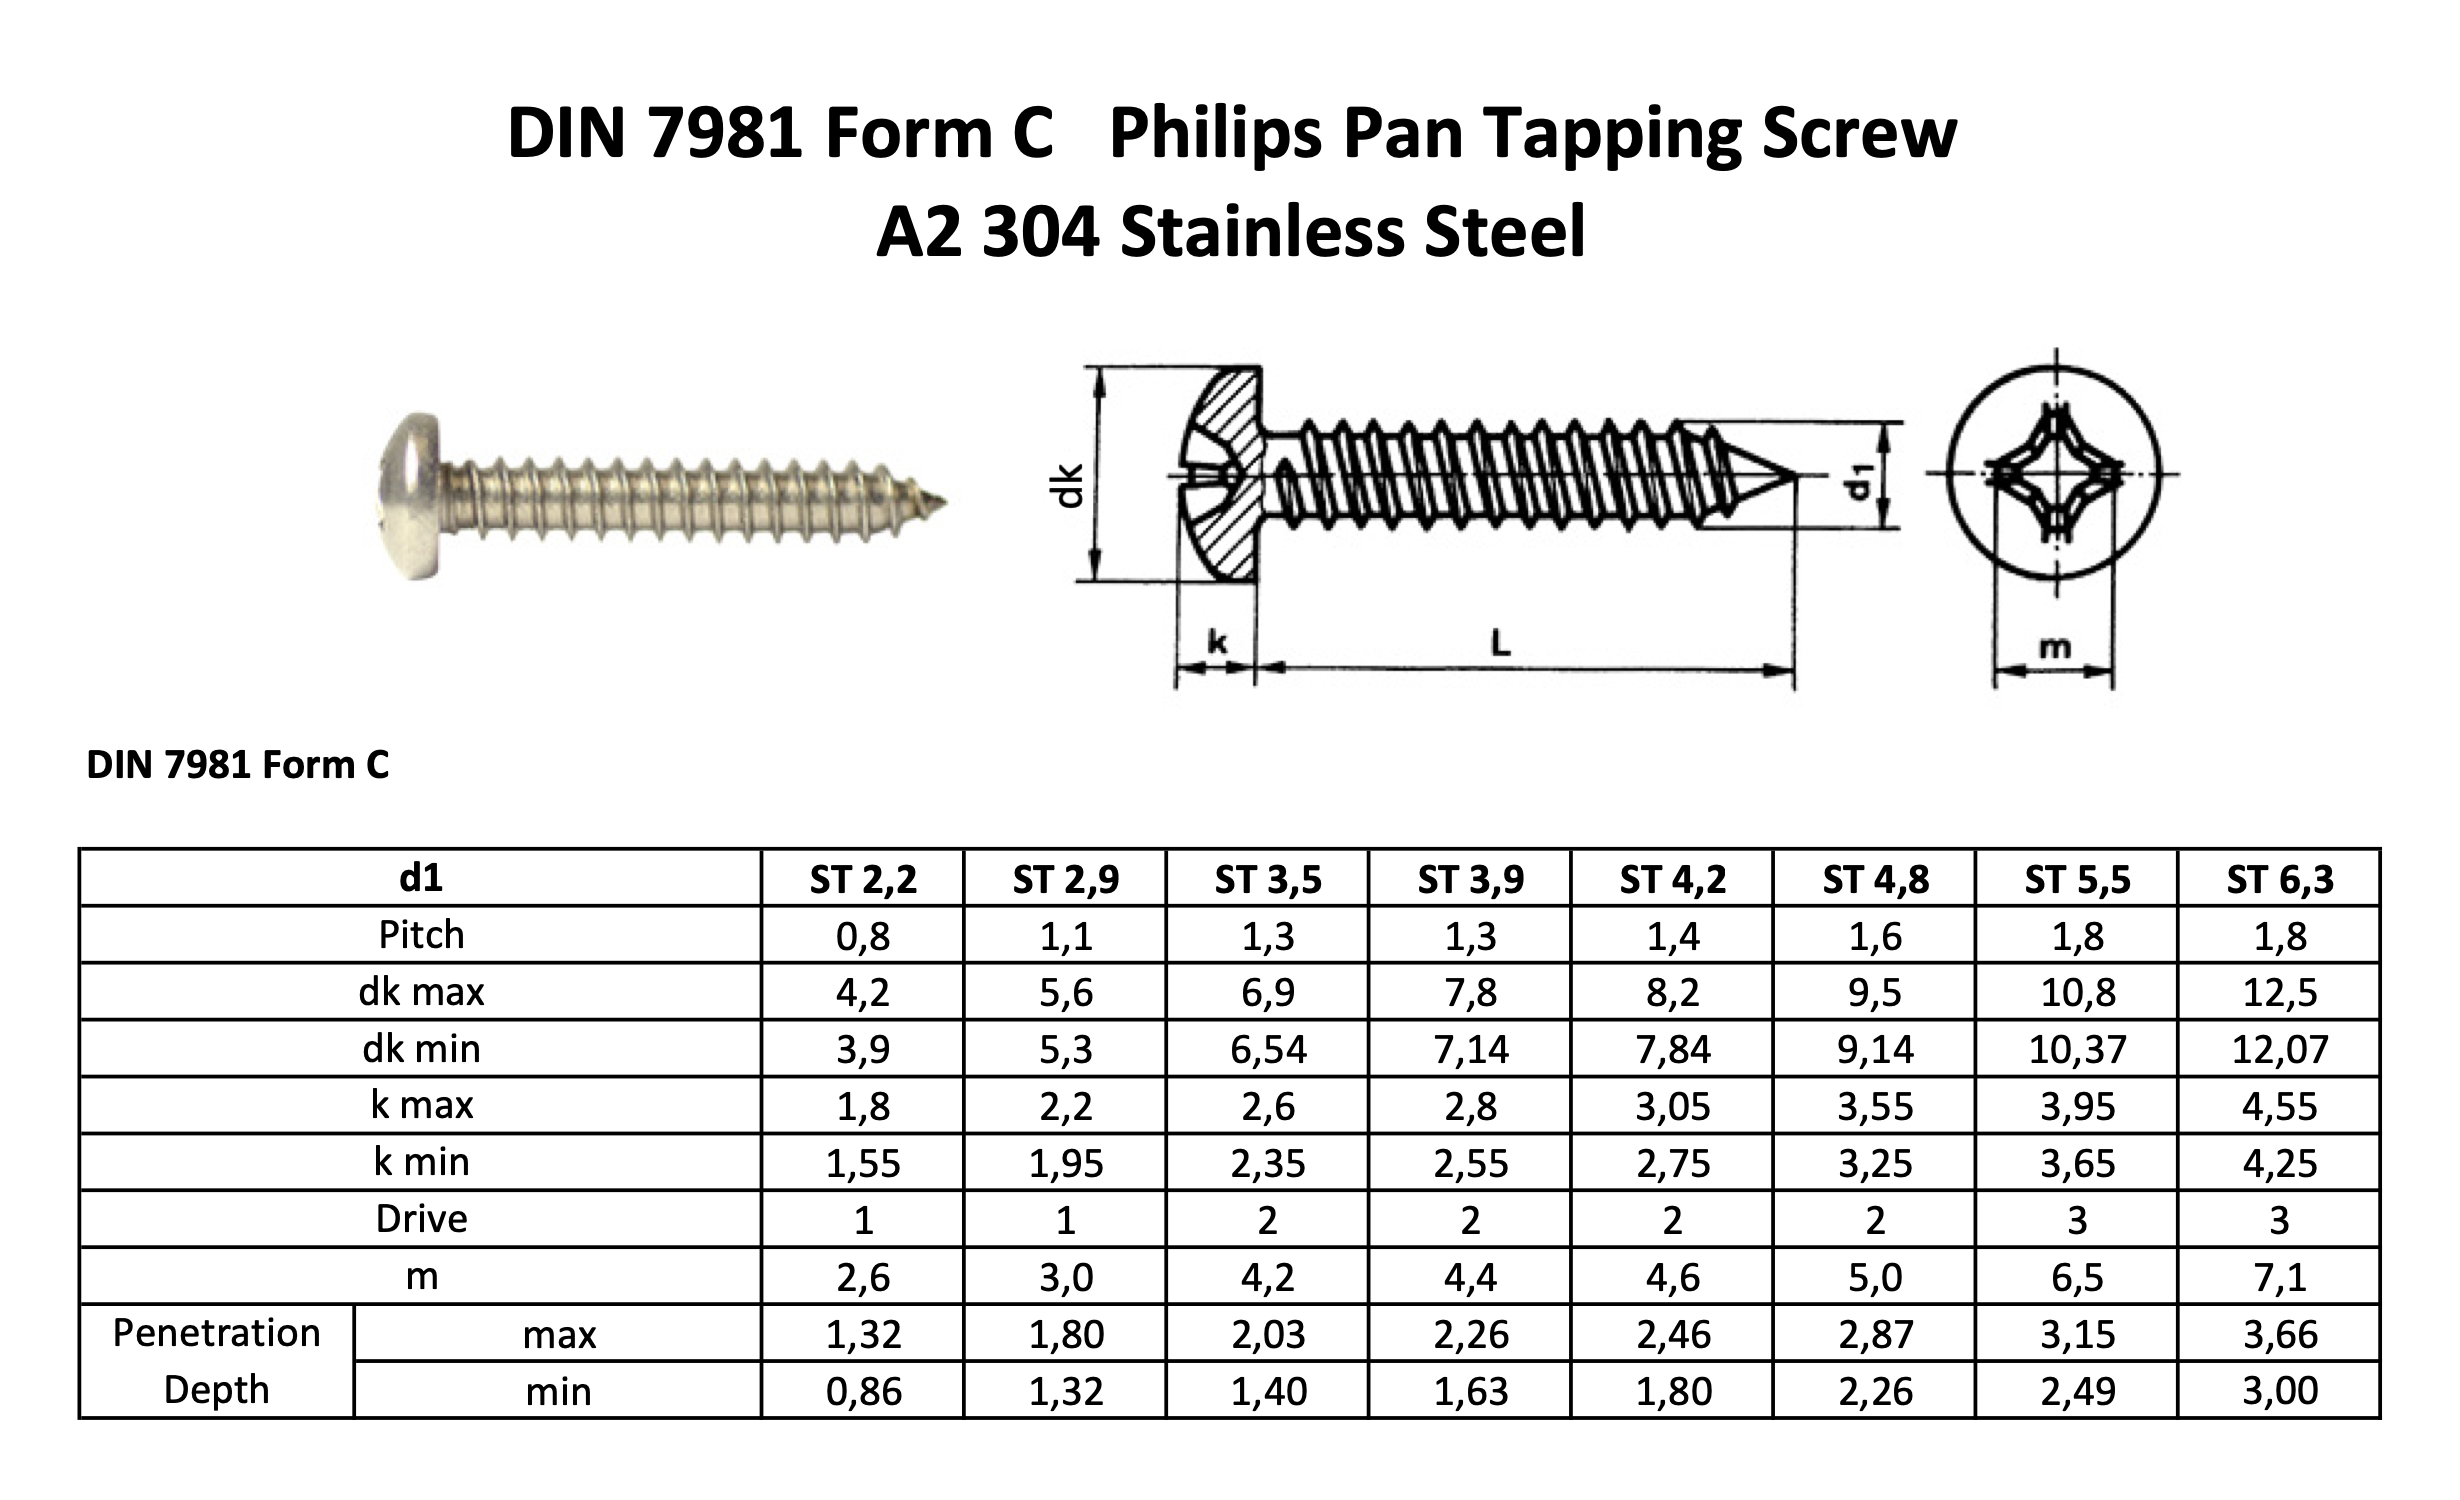 DIN 7981 A2 STAINLESS STEEL